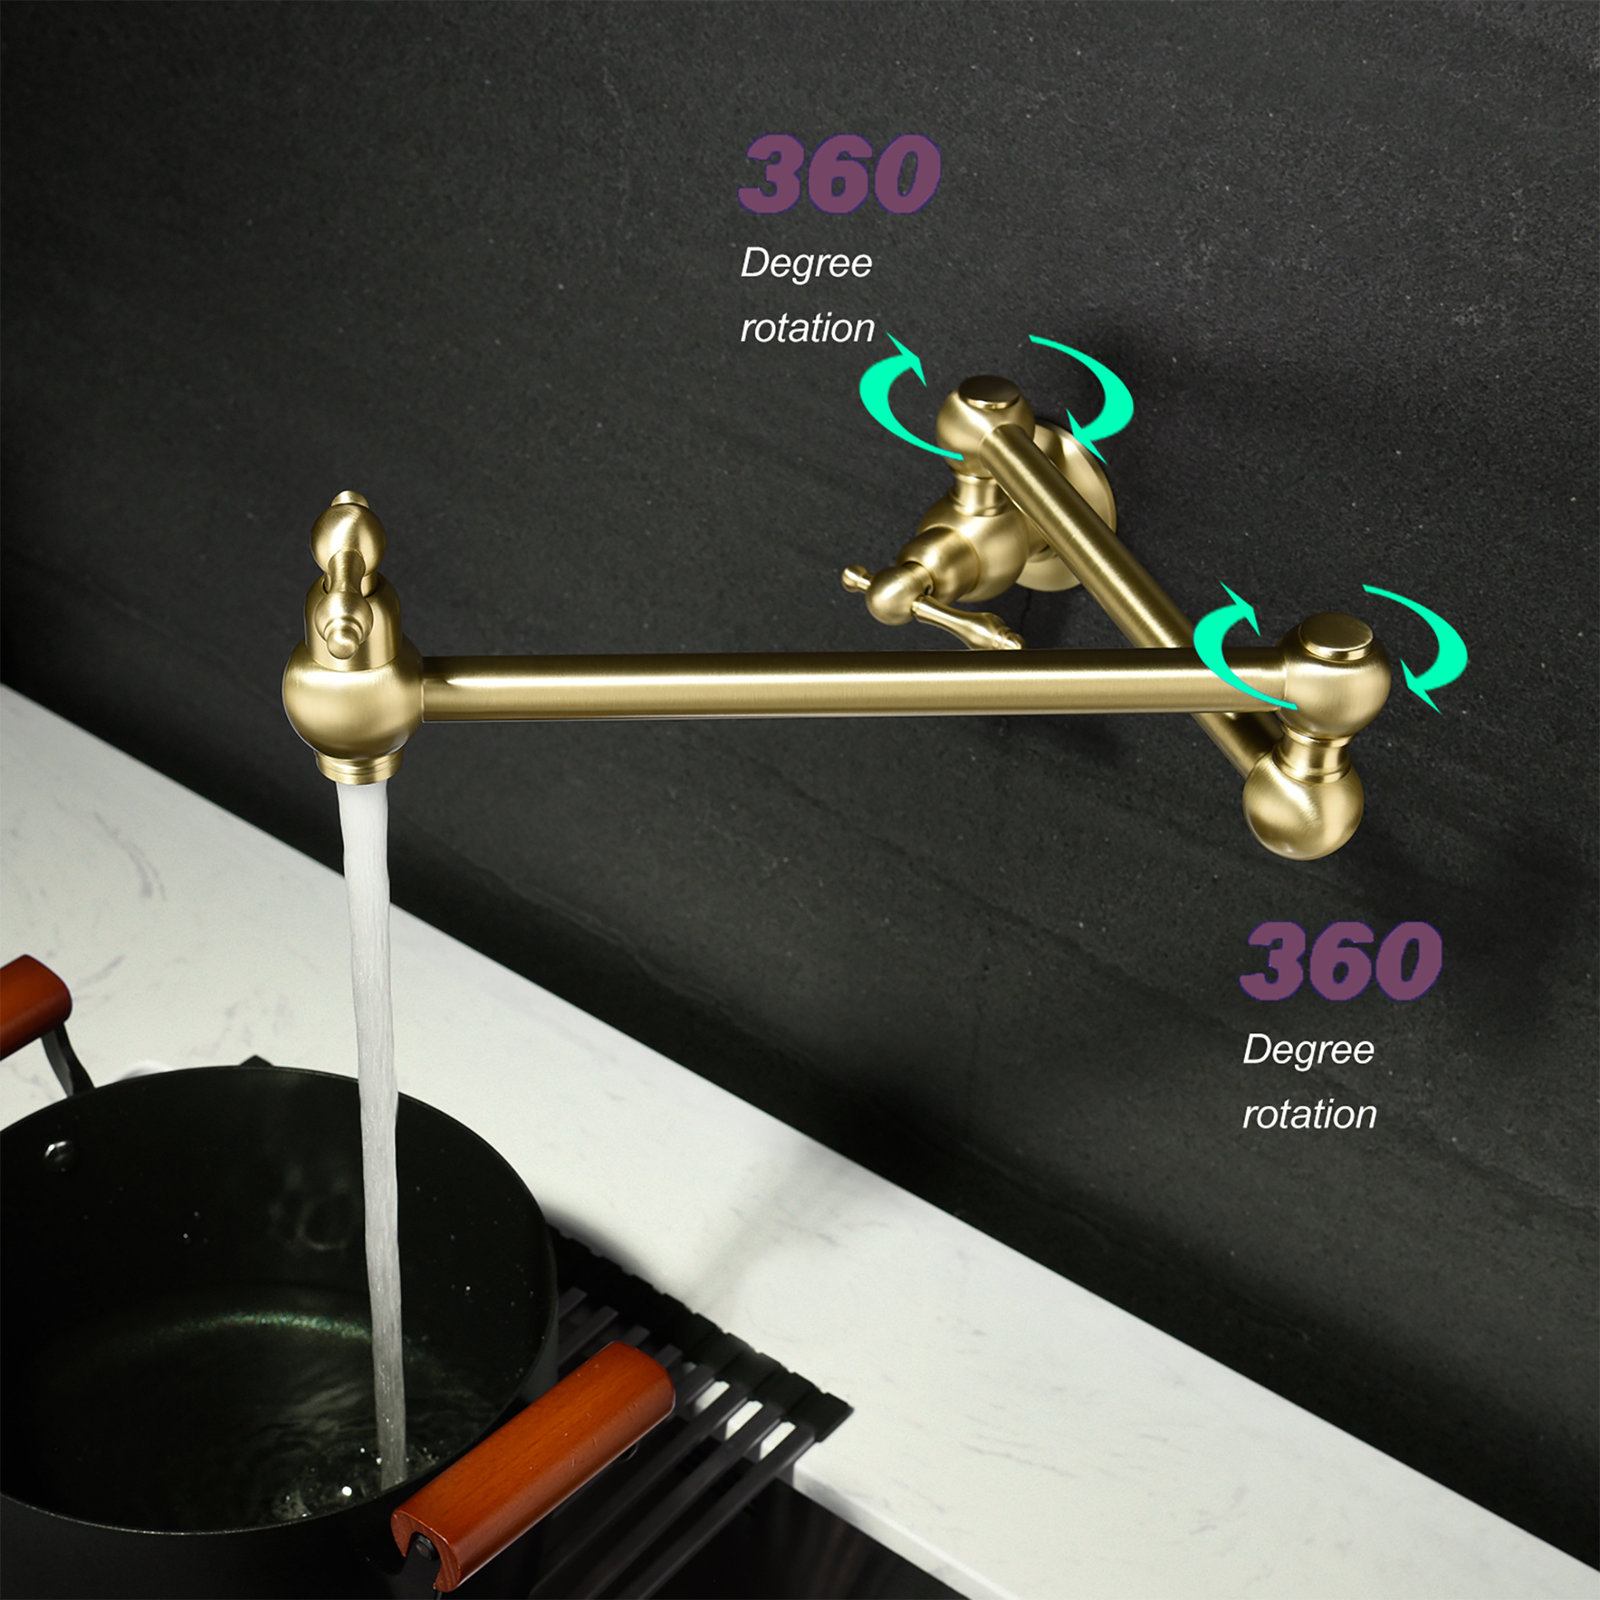 Aquacubic Pot Filler Folding Faucets,Wall Mount Pot Filler Kitchen Faucet Solid Brass,Swing Arm Folding Brushed Gold Modern Kitchen Sink Faucet Folding Stretchable with Single Hole Two Handle